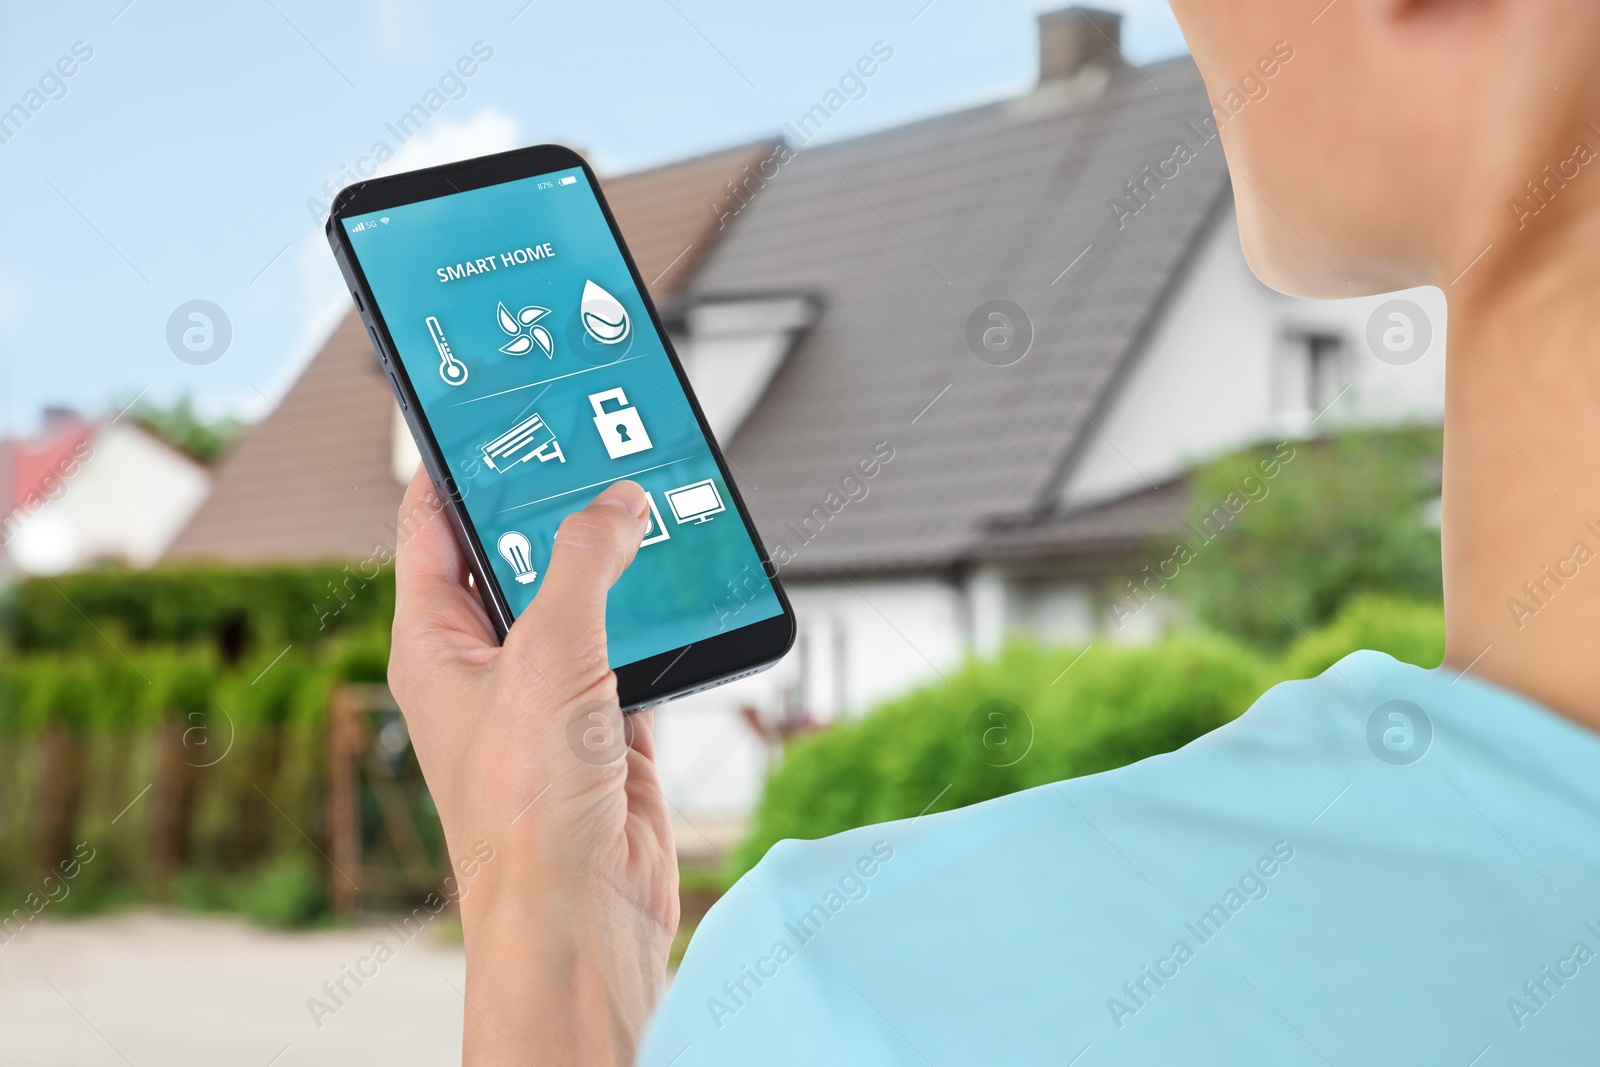 Image of Woman using smart home control system via mobile phone near house outdoors, closeup